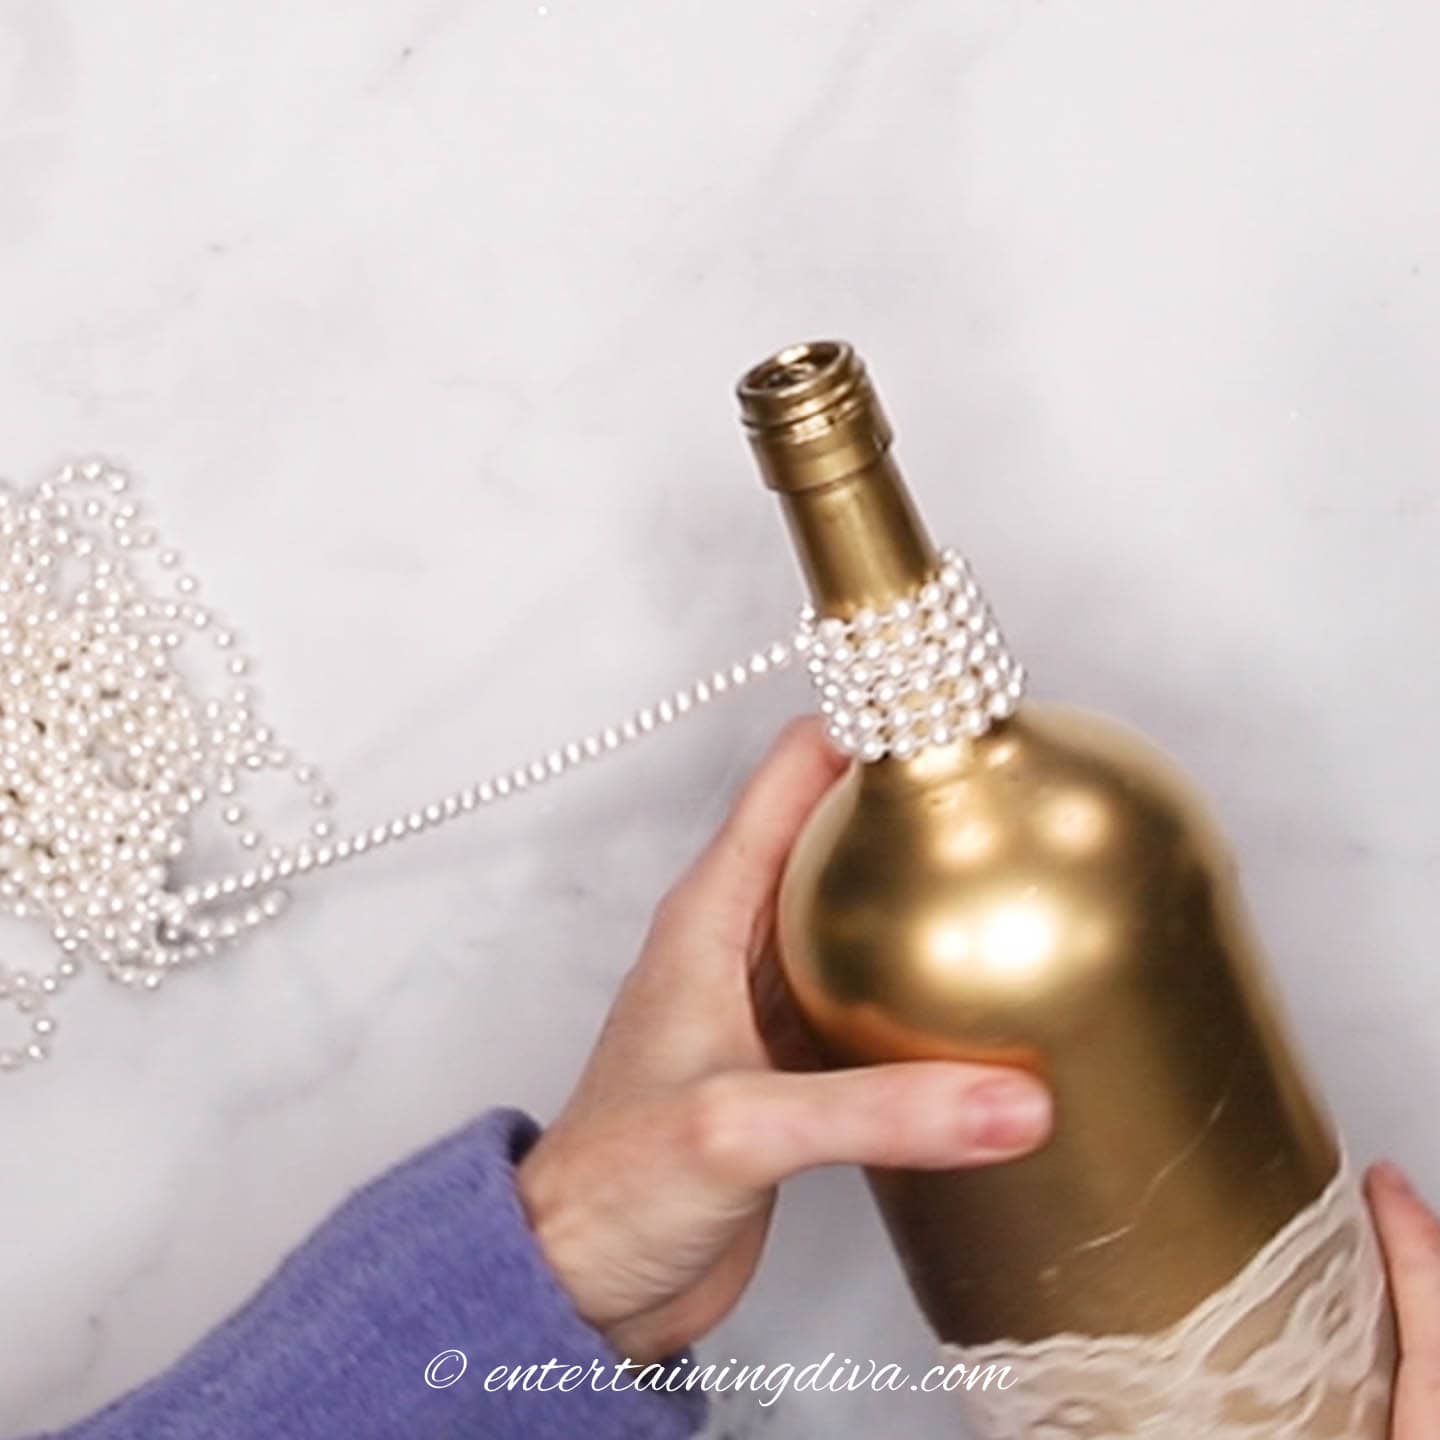 String of pearls being wound around the neck of a wine bottle